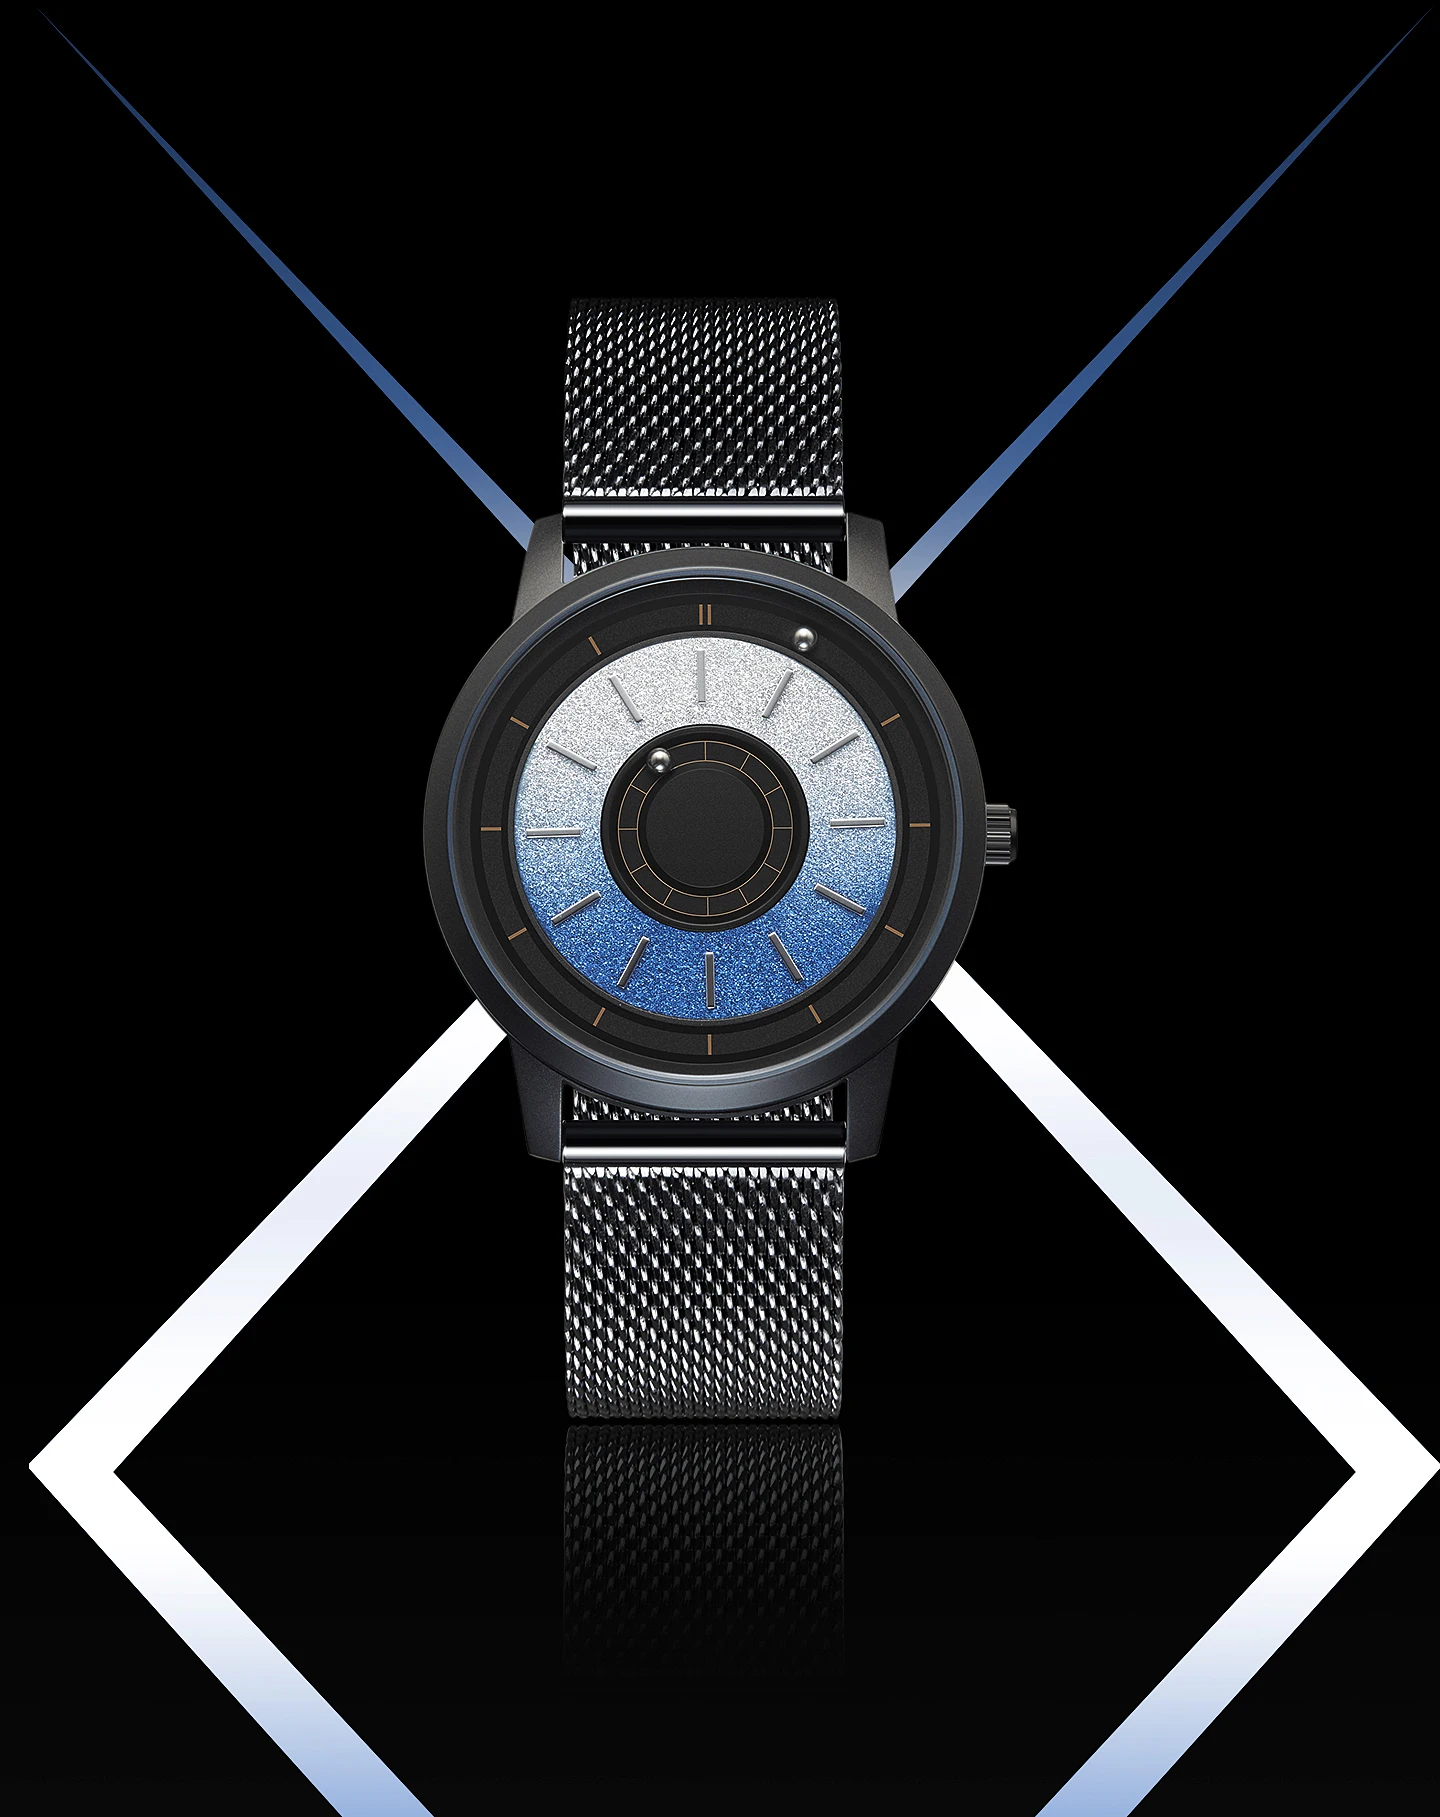 eutour-e040-novelty-magnetic-watch-man-and-women-steel-strap-ball-show-pointers-quartz-watches-men-blue-fashion-couple-watch